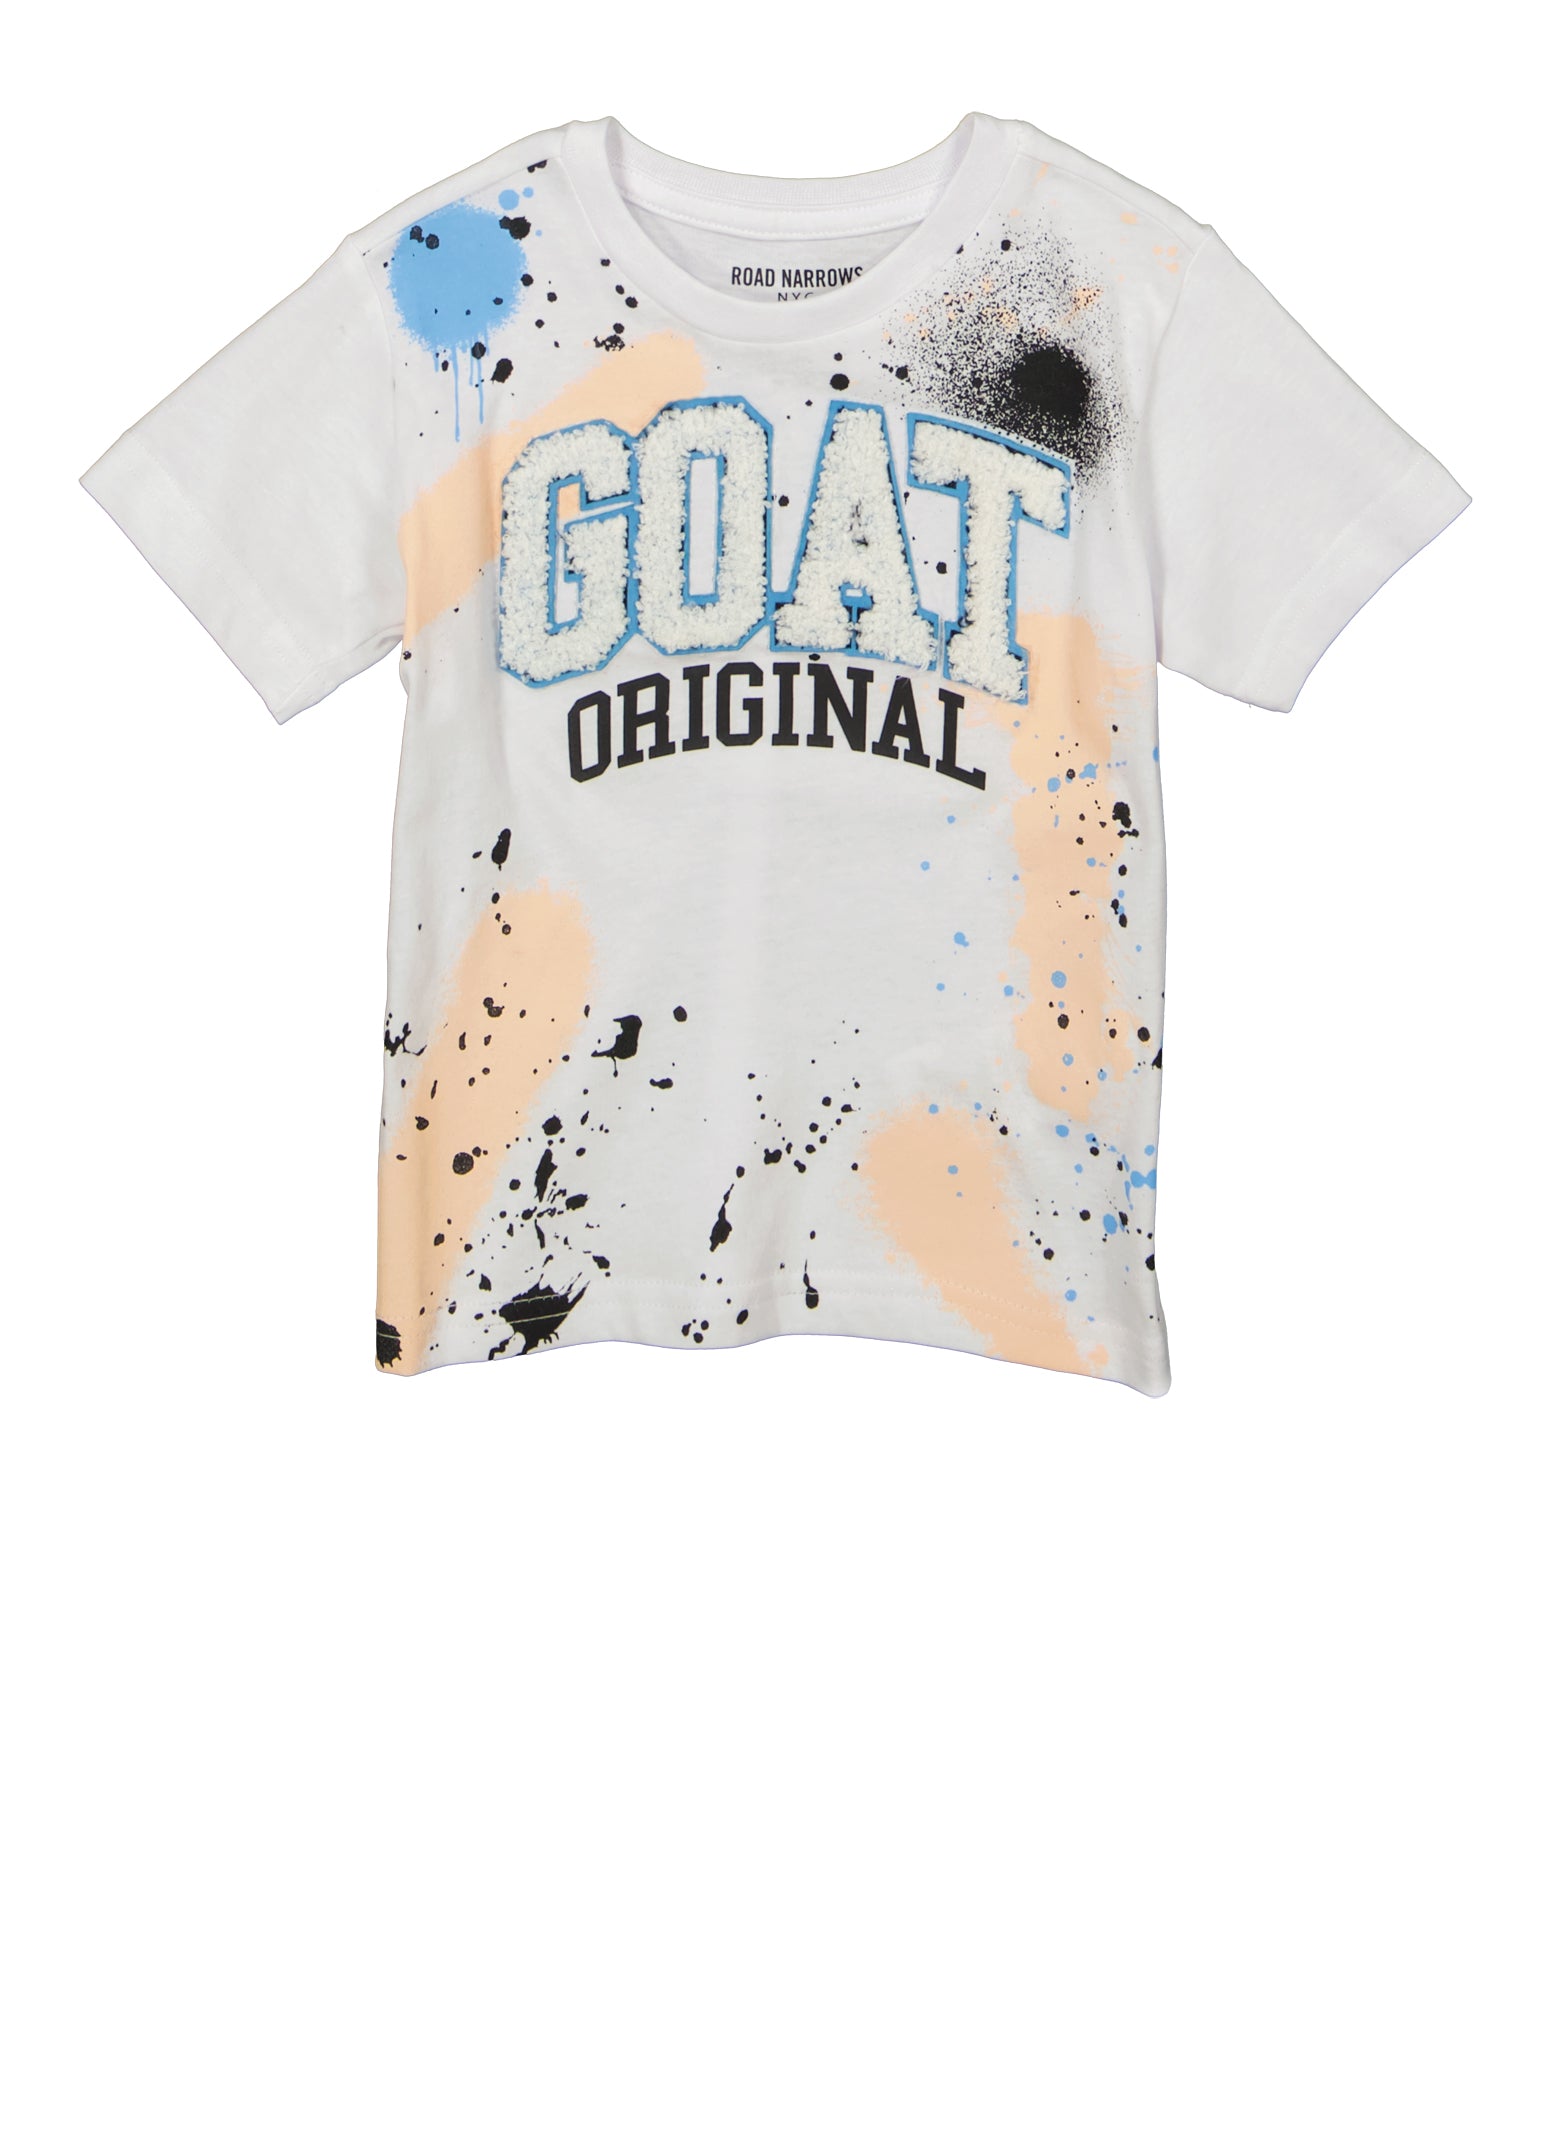 Toddler Boys Goat Original Chenille Patch Graphic Tee